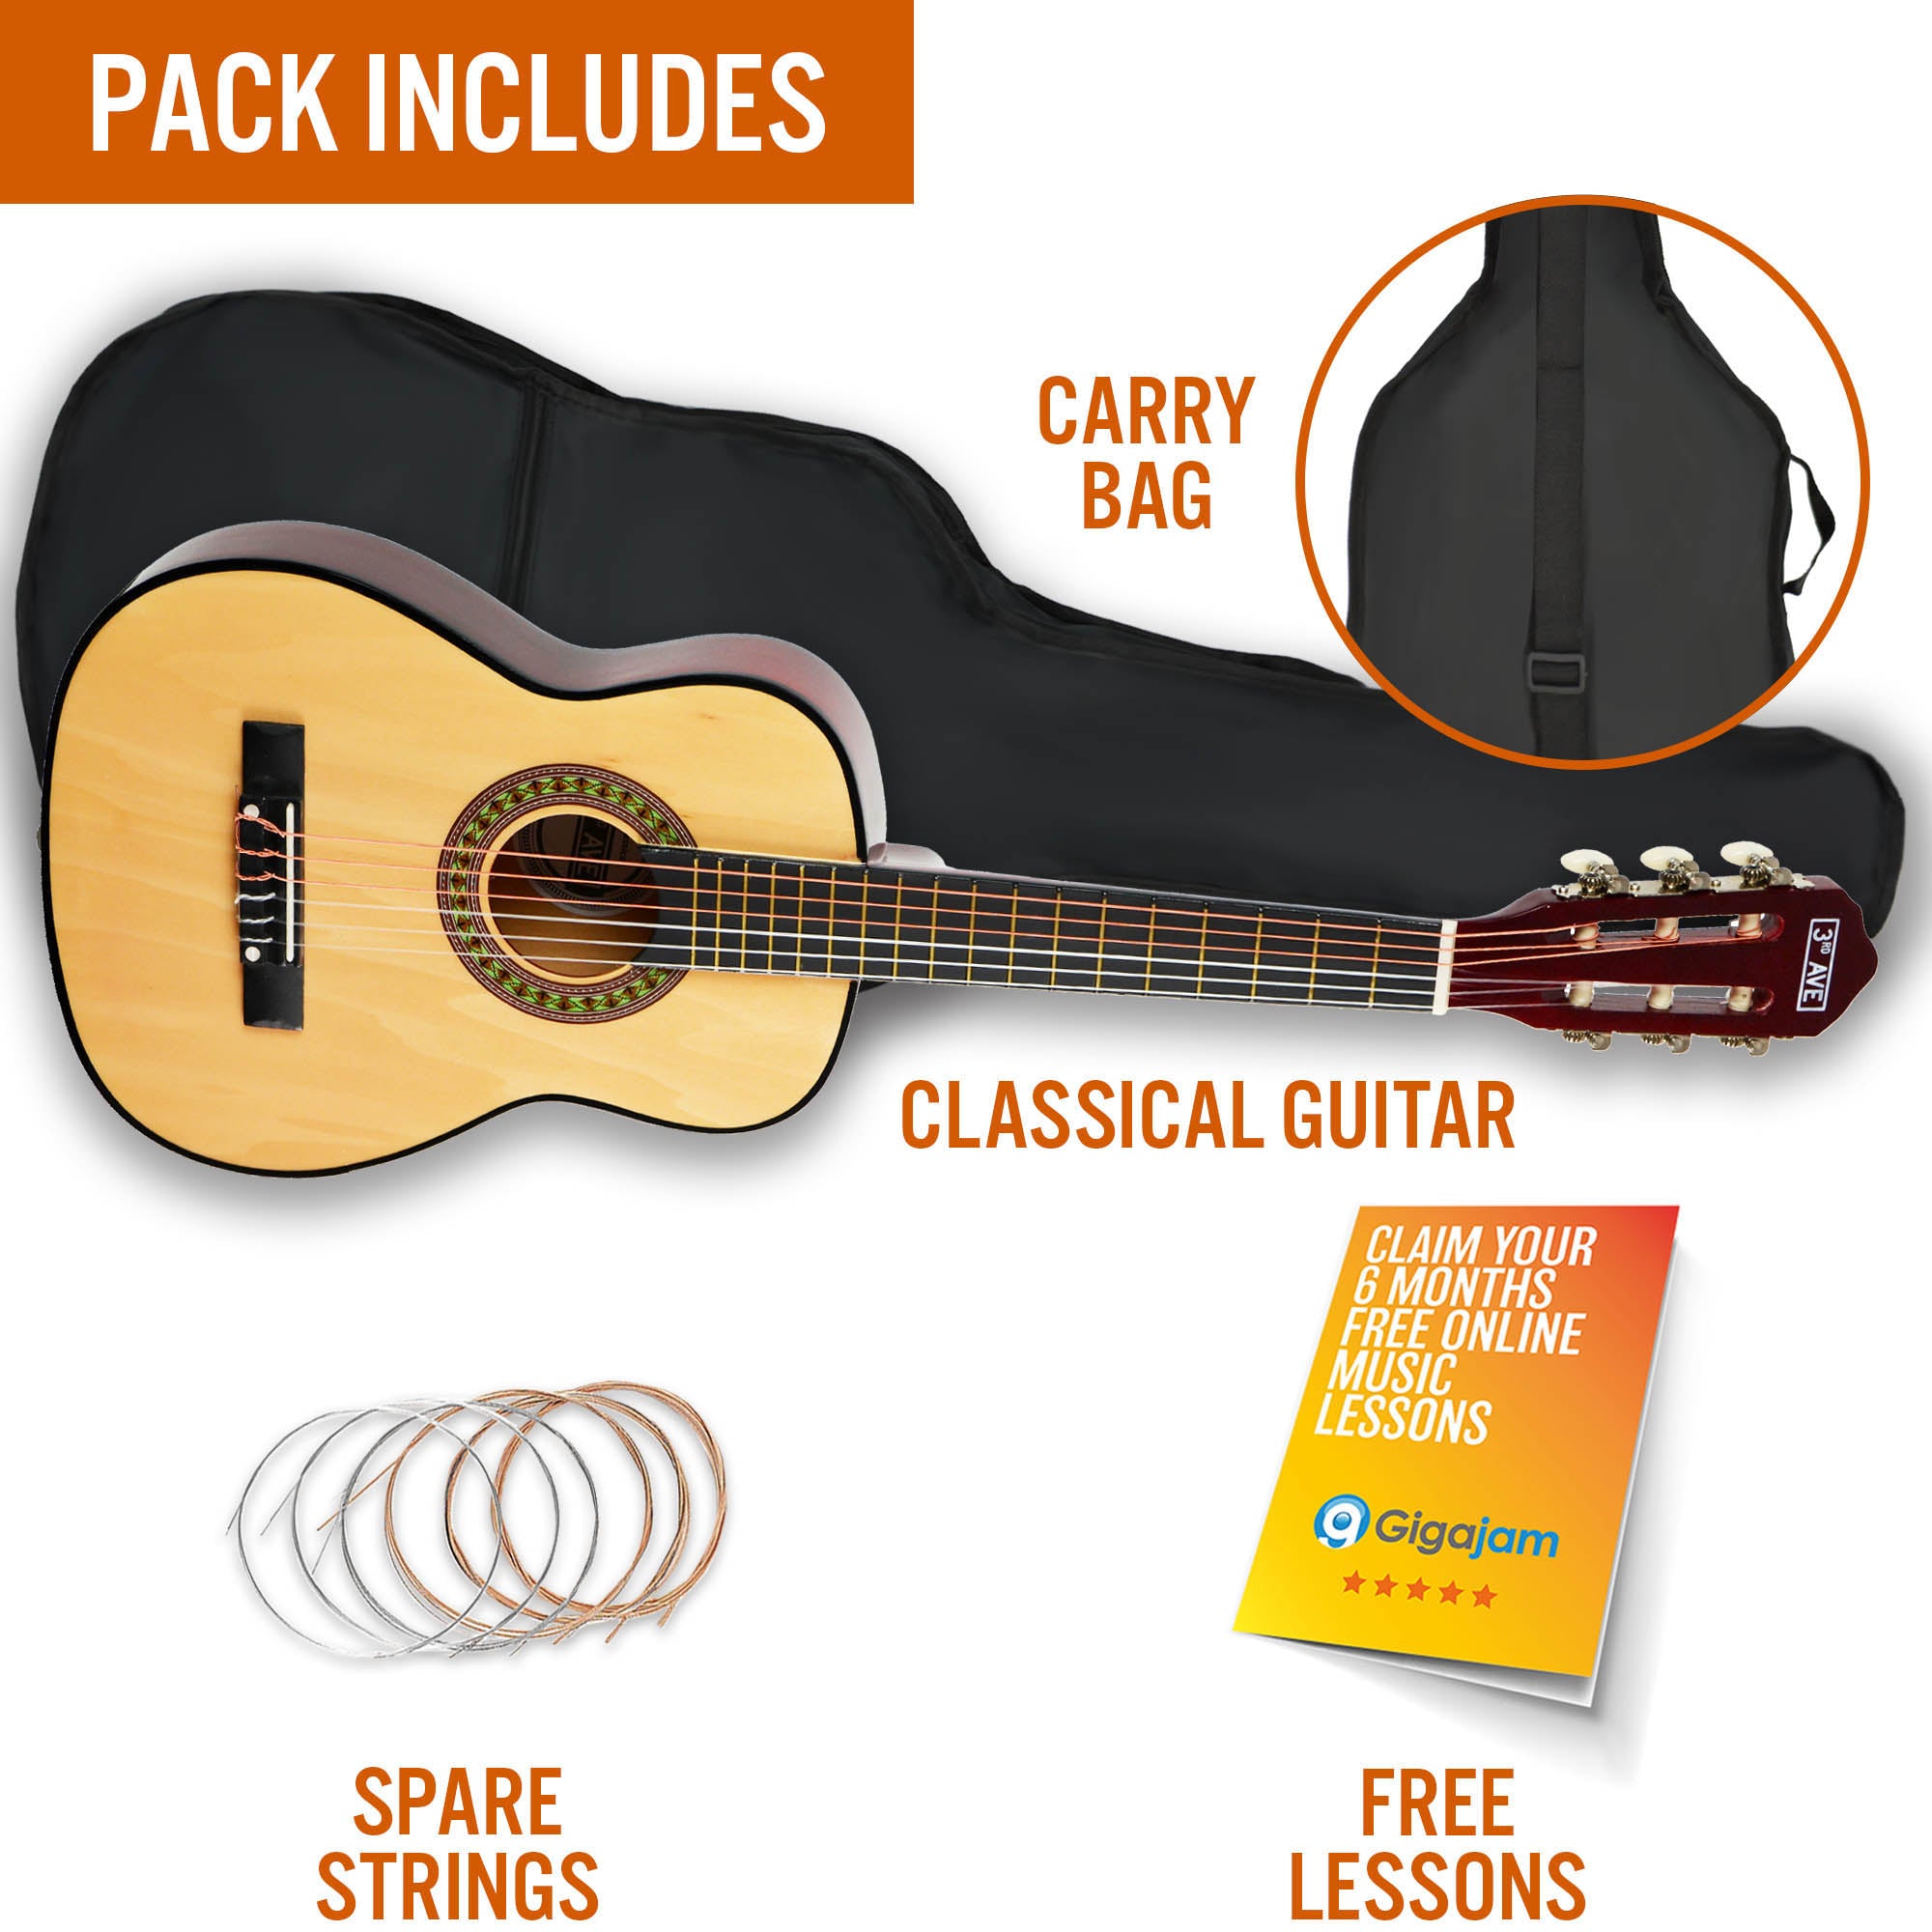 3rd Avenue 1/2 Size Classical Guitar Pack